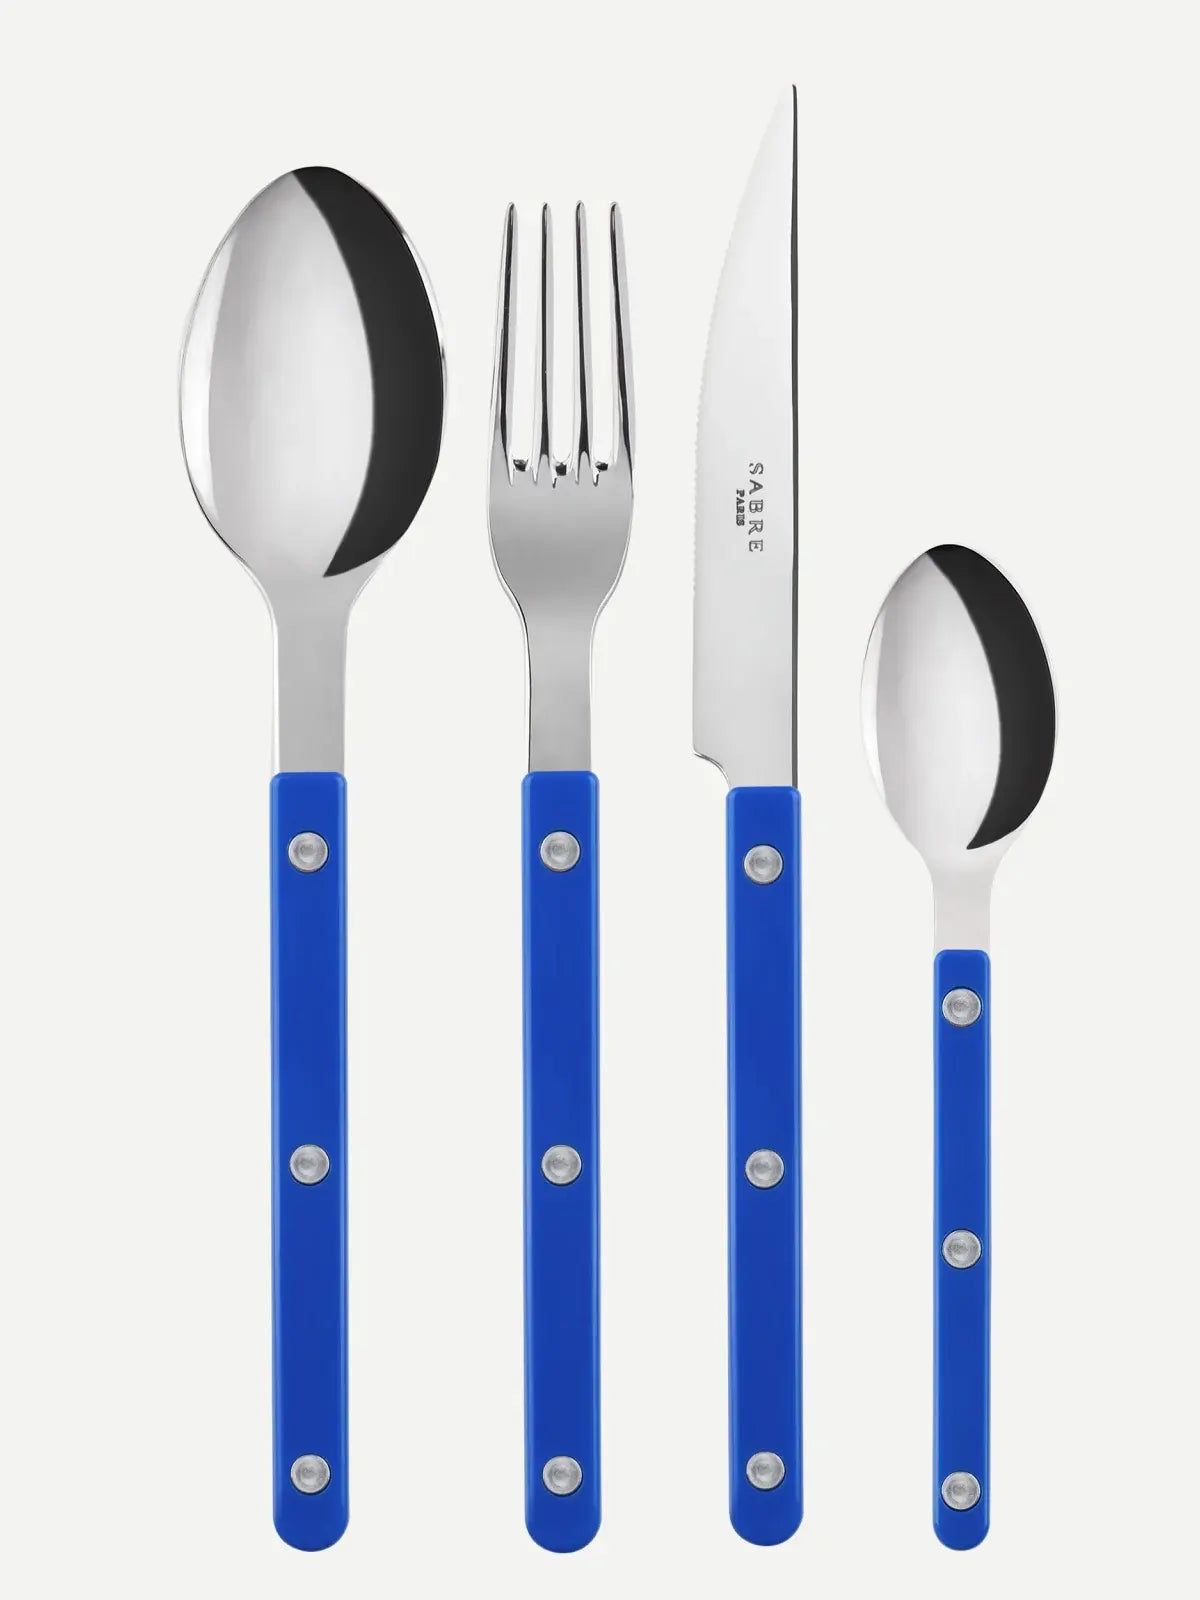 The little blue Bistrot spoon couples great with the Sabre Paris tablespoon, dinner fork and the dinner knife of the same colour. But why not try to mix mix it with other shades, too, as the cutleries are available to buy in single pieces - think the blue with burgundy or true red, orange, ivory or the faux tortoise patterned Bistrot cutleries!